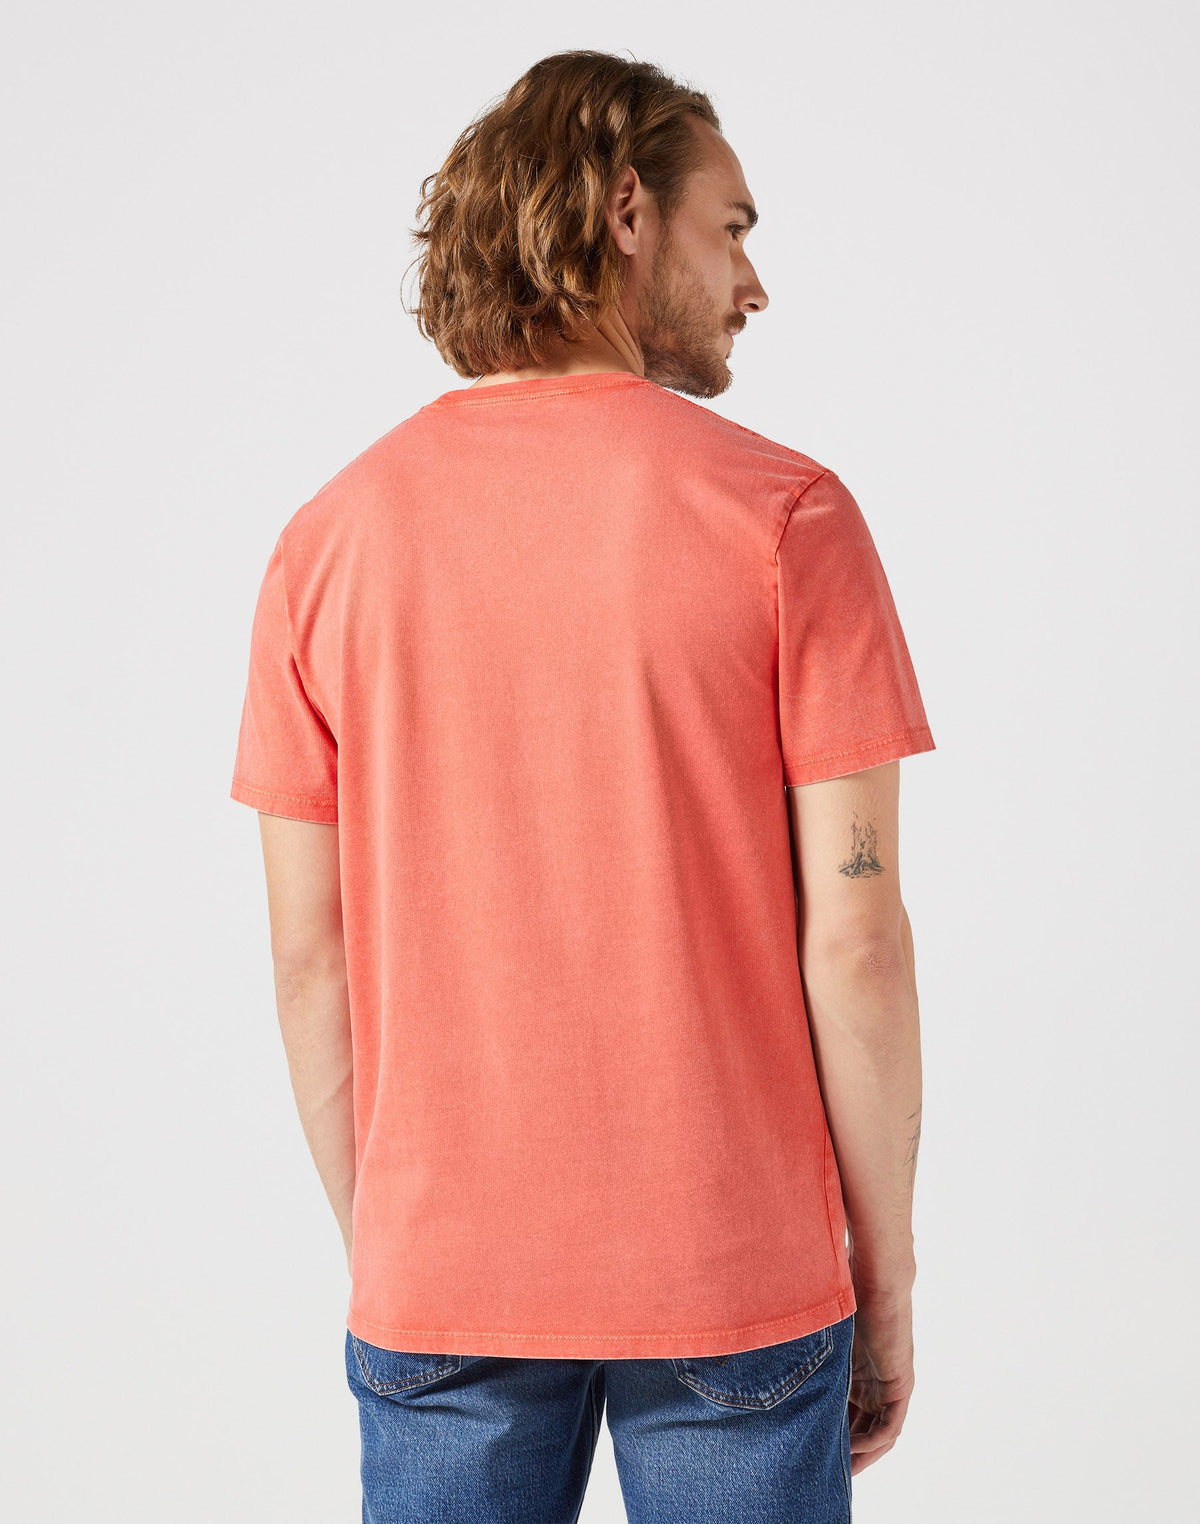 Graphic Tee in Burnt Sienna